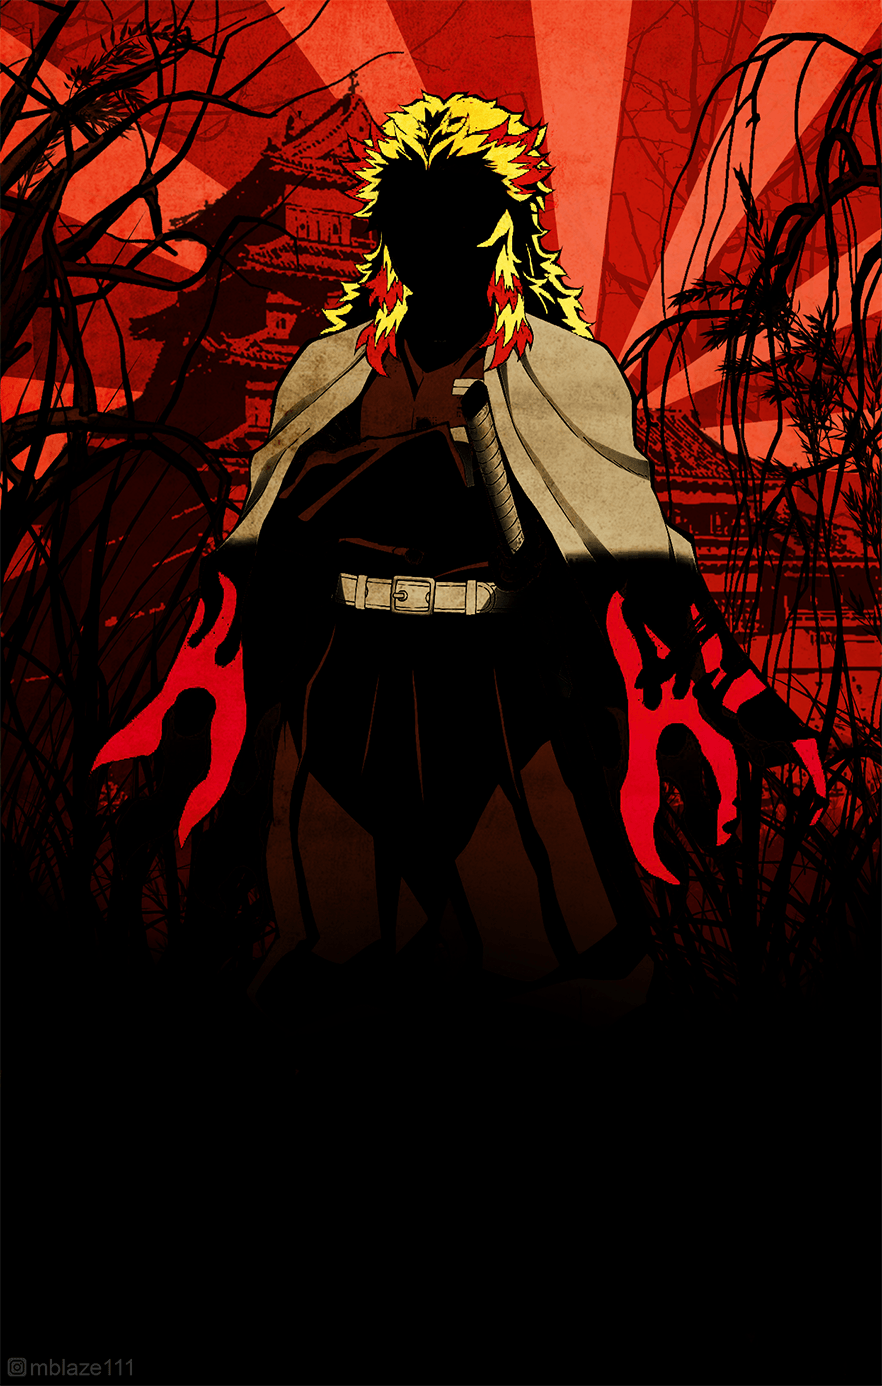 I made Kyojuro Rengoku wallpaper. Hope you guys like it. Also added Ancient Japan feel to the wallpaper as suggested